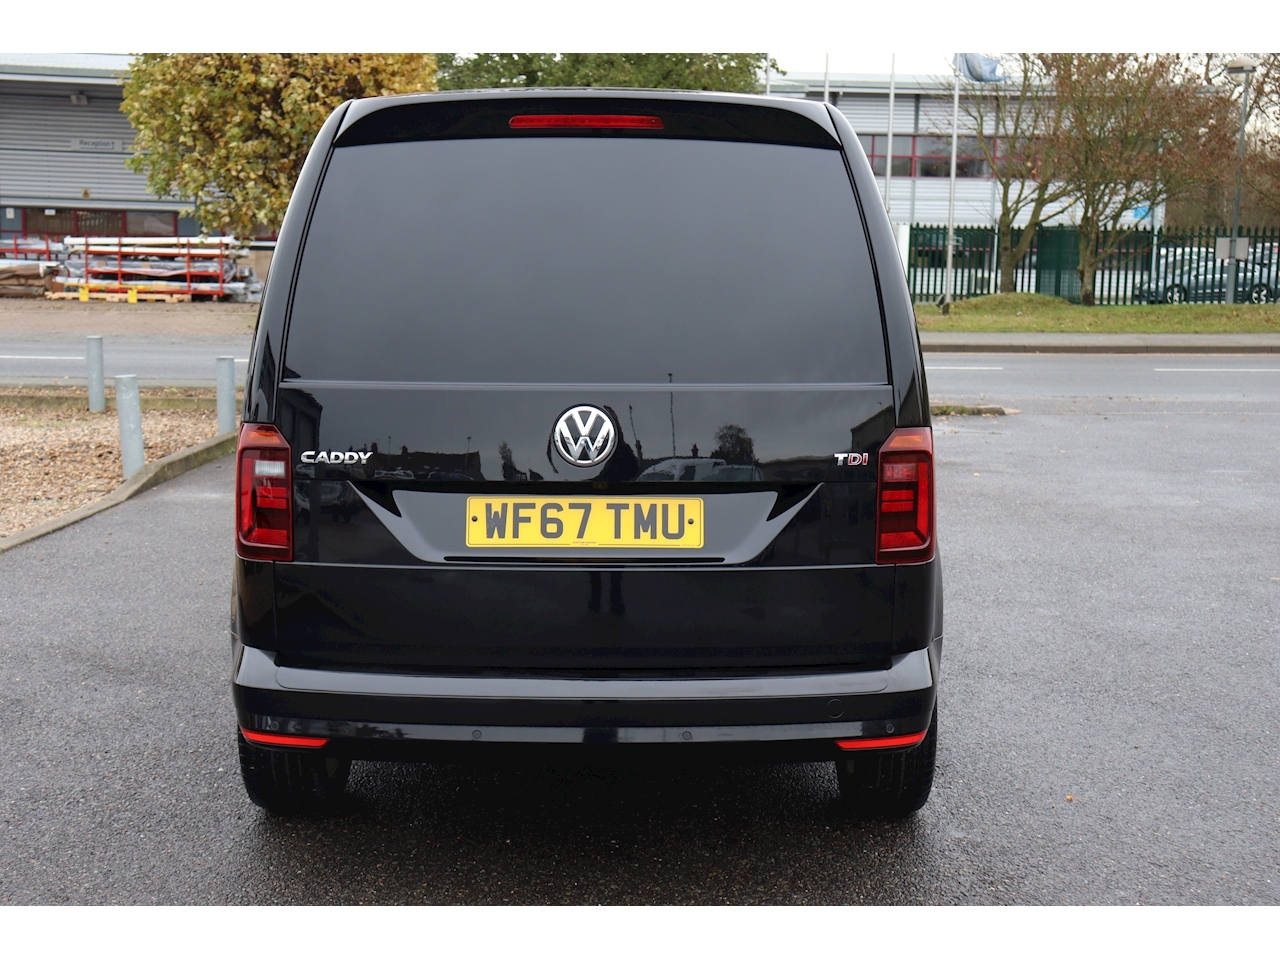 Used 2017 Volkswagen Caddy 2.0 TDI C20 BlueMotion Tech Highline EU6 (s/s)  5dr For Sale in Norfolk